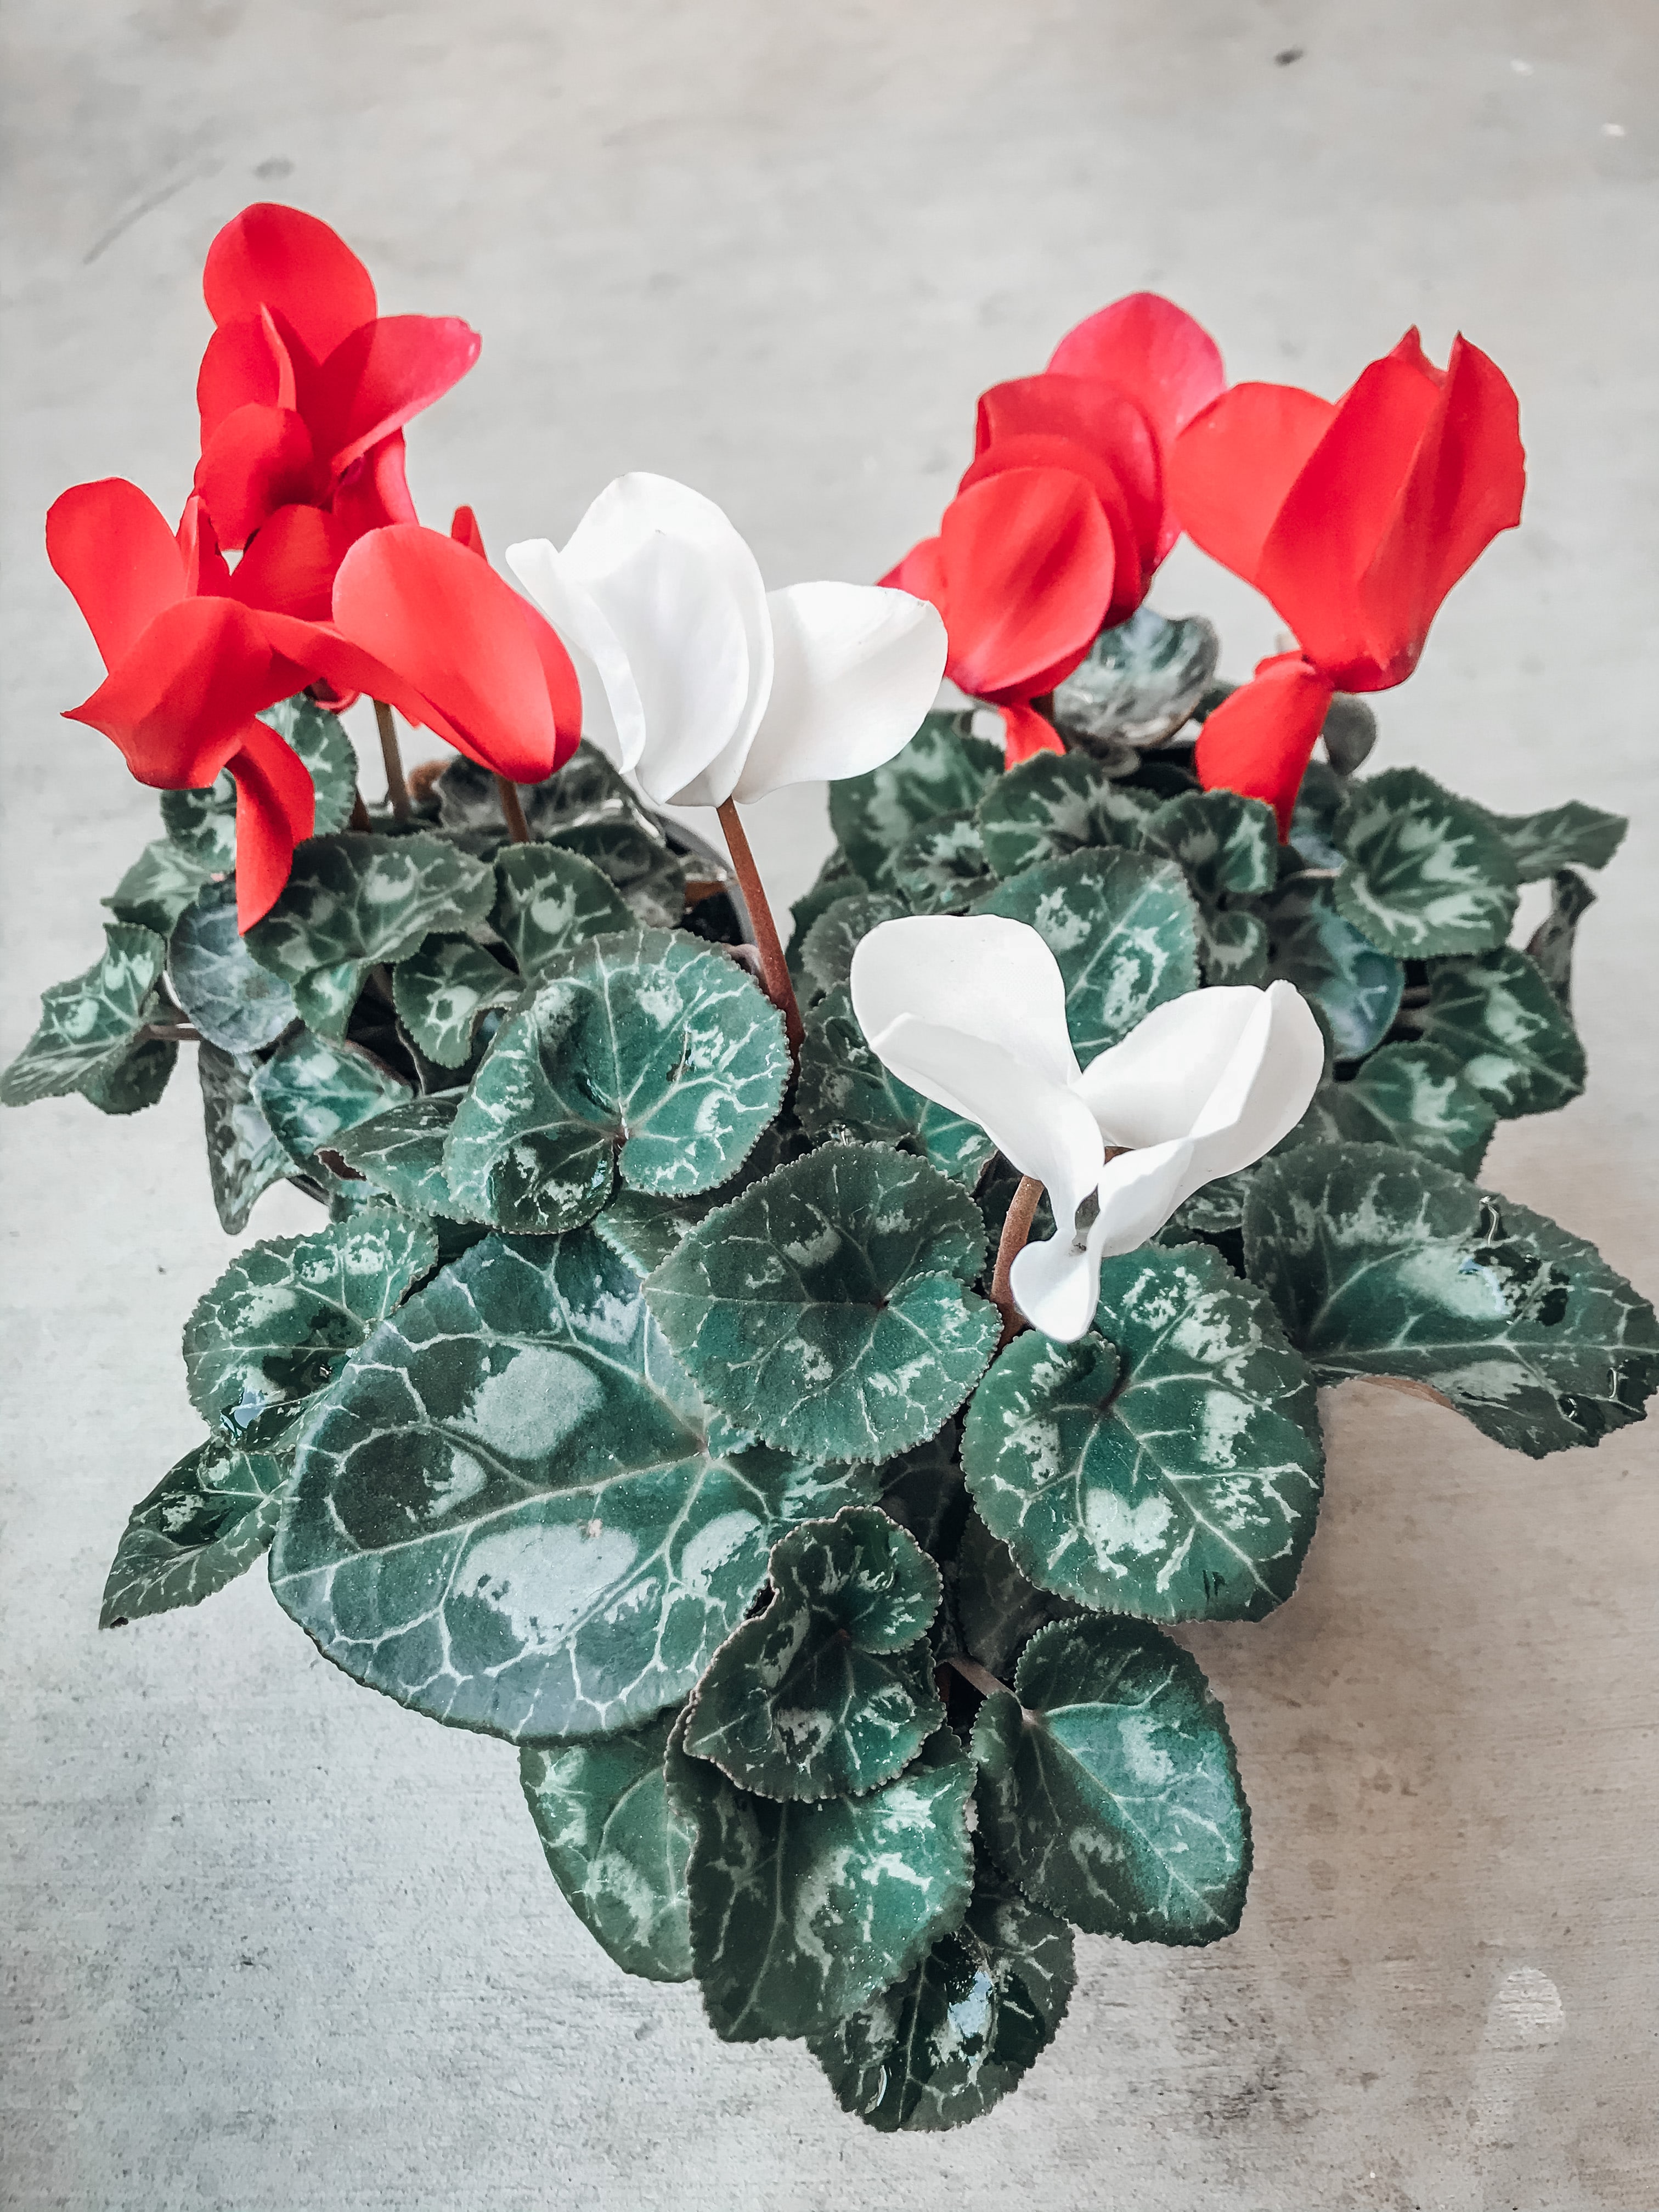 Cyclamen Care Tips: How to Easily Care for a Cyclamen Plant